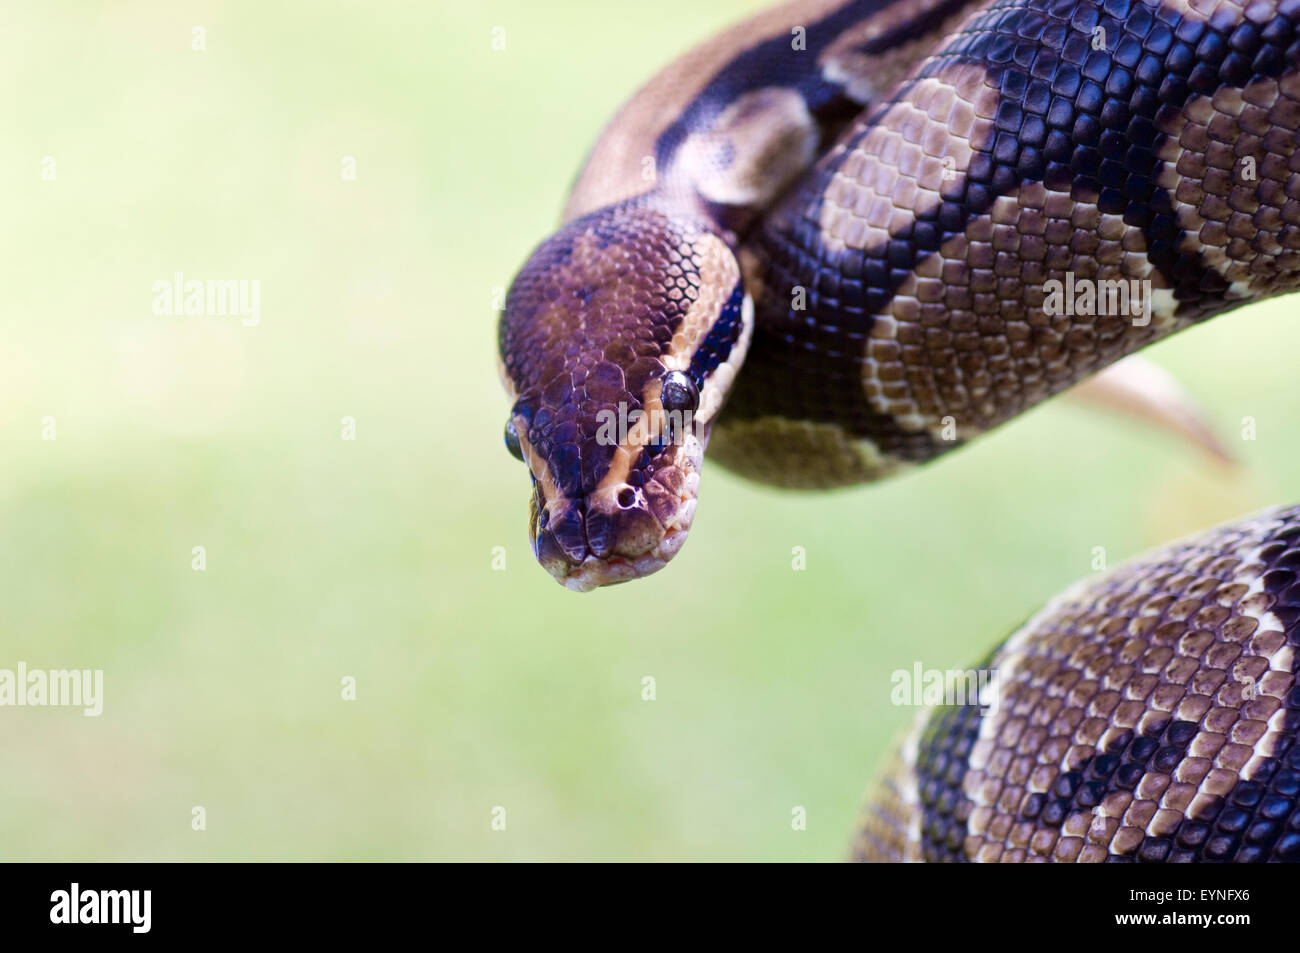 Close-up image of the head and body of an adult royal python, python regius. This is a captive animal. Stock Photo